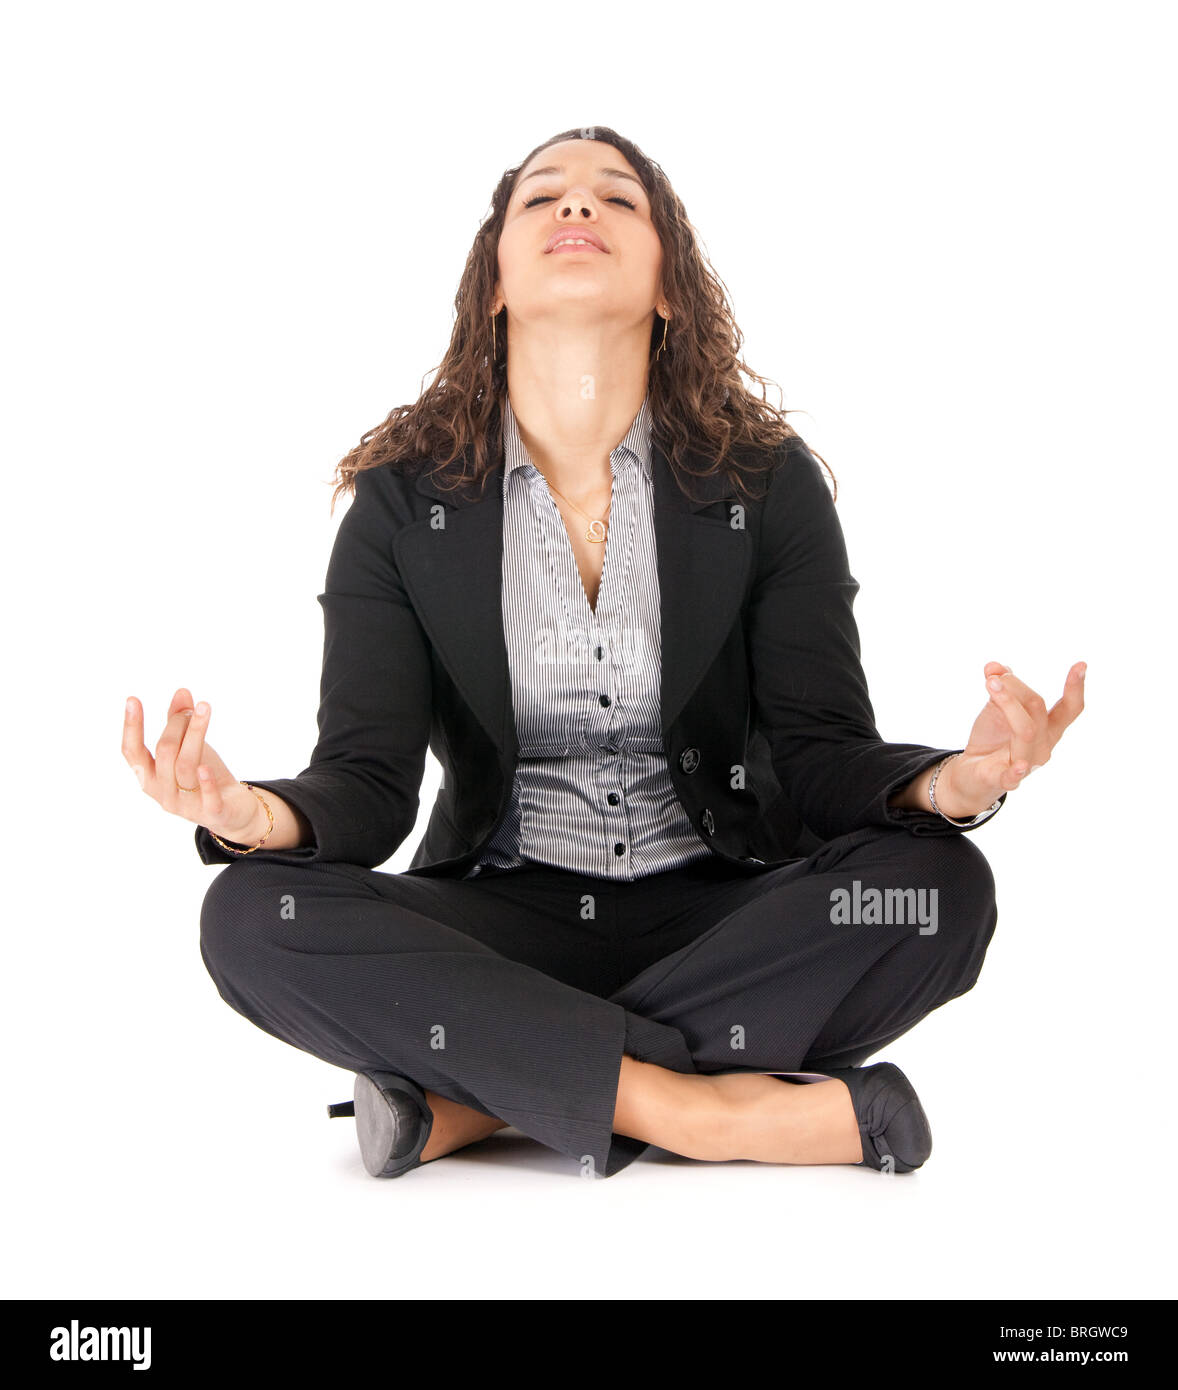 young business woman in yoga position taking a breath Stock Photo